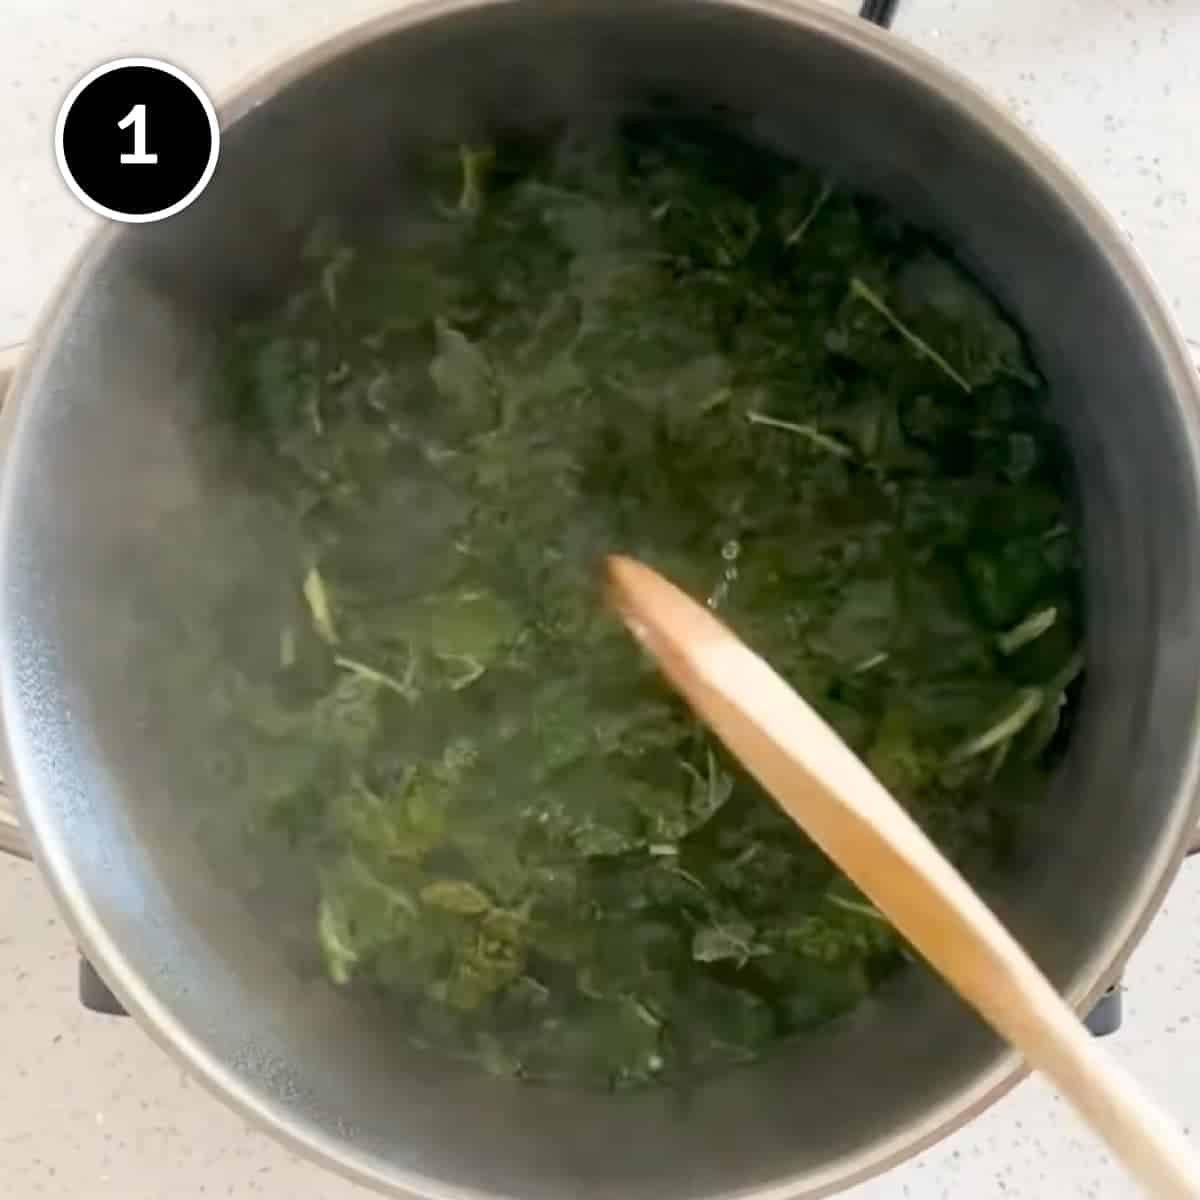 Boiling the cavolo nero in a pan of water